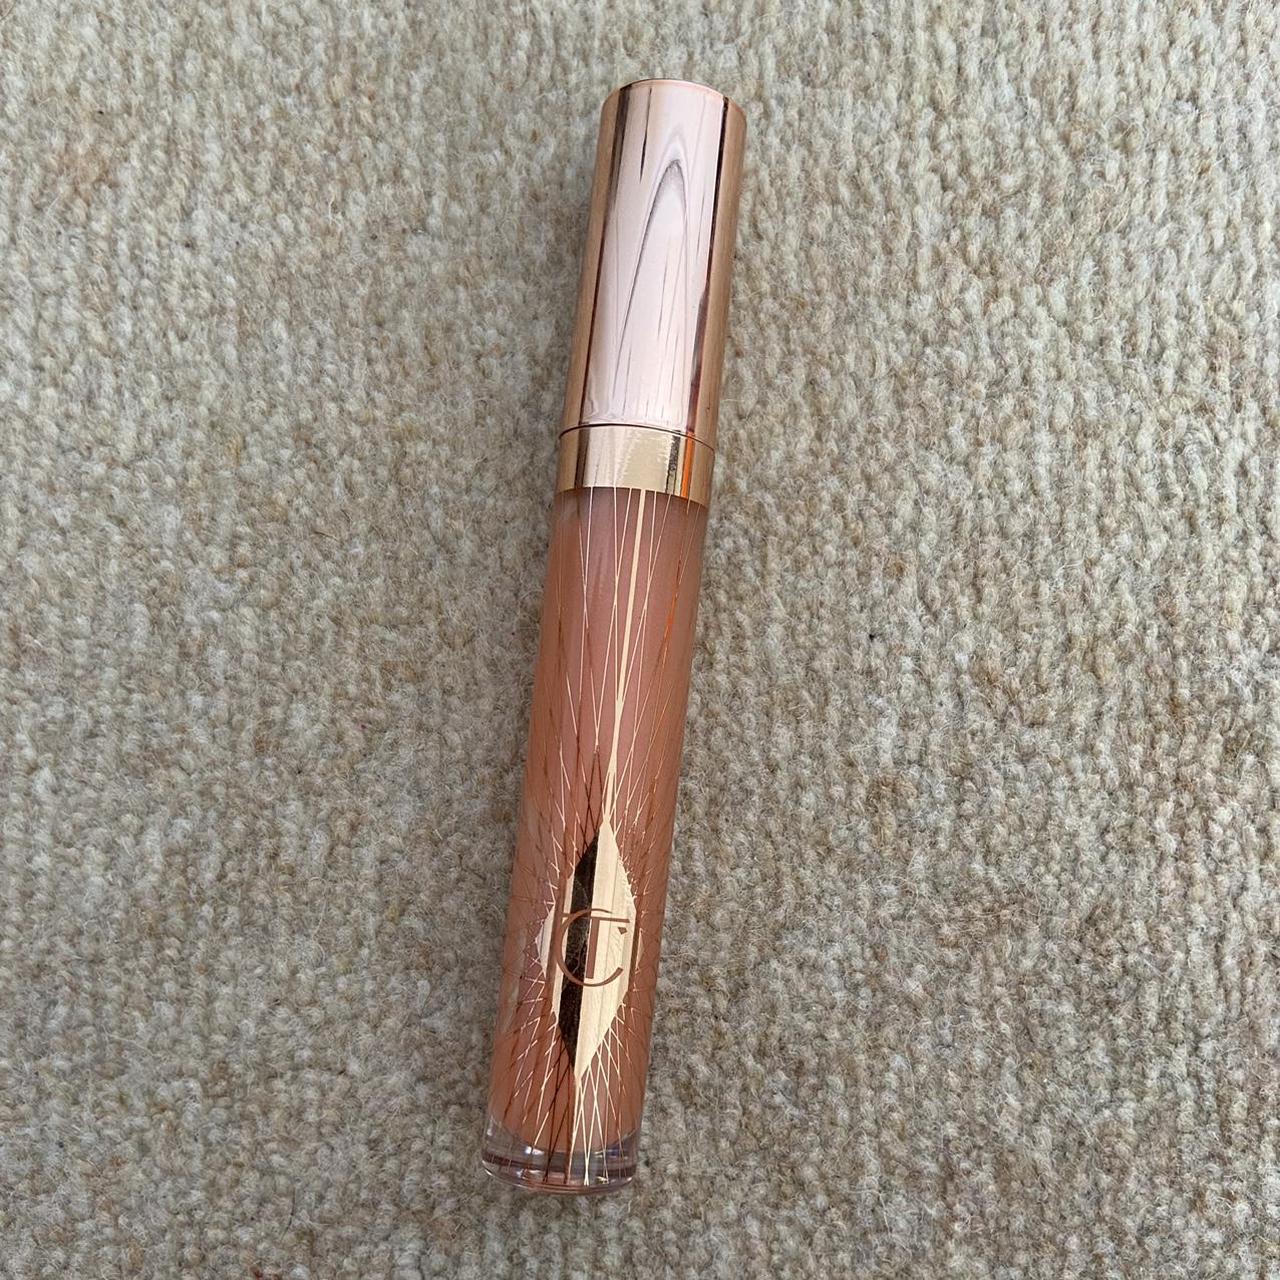 Product Image 3 - For @liliellaxo 🥰

Charlotte Tilbury Collagen